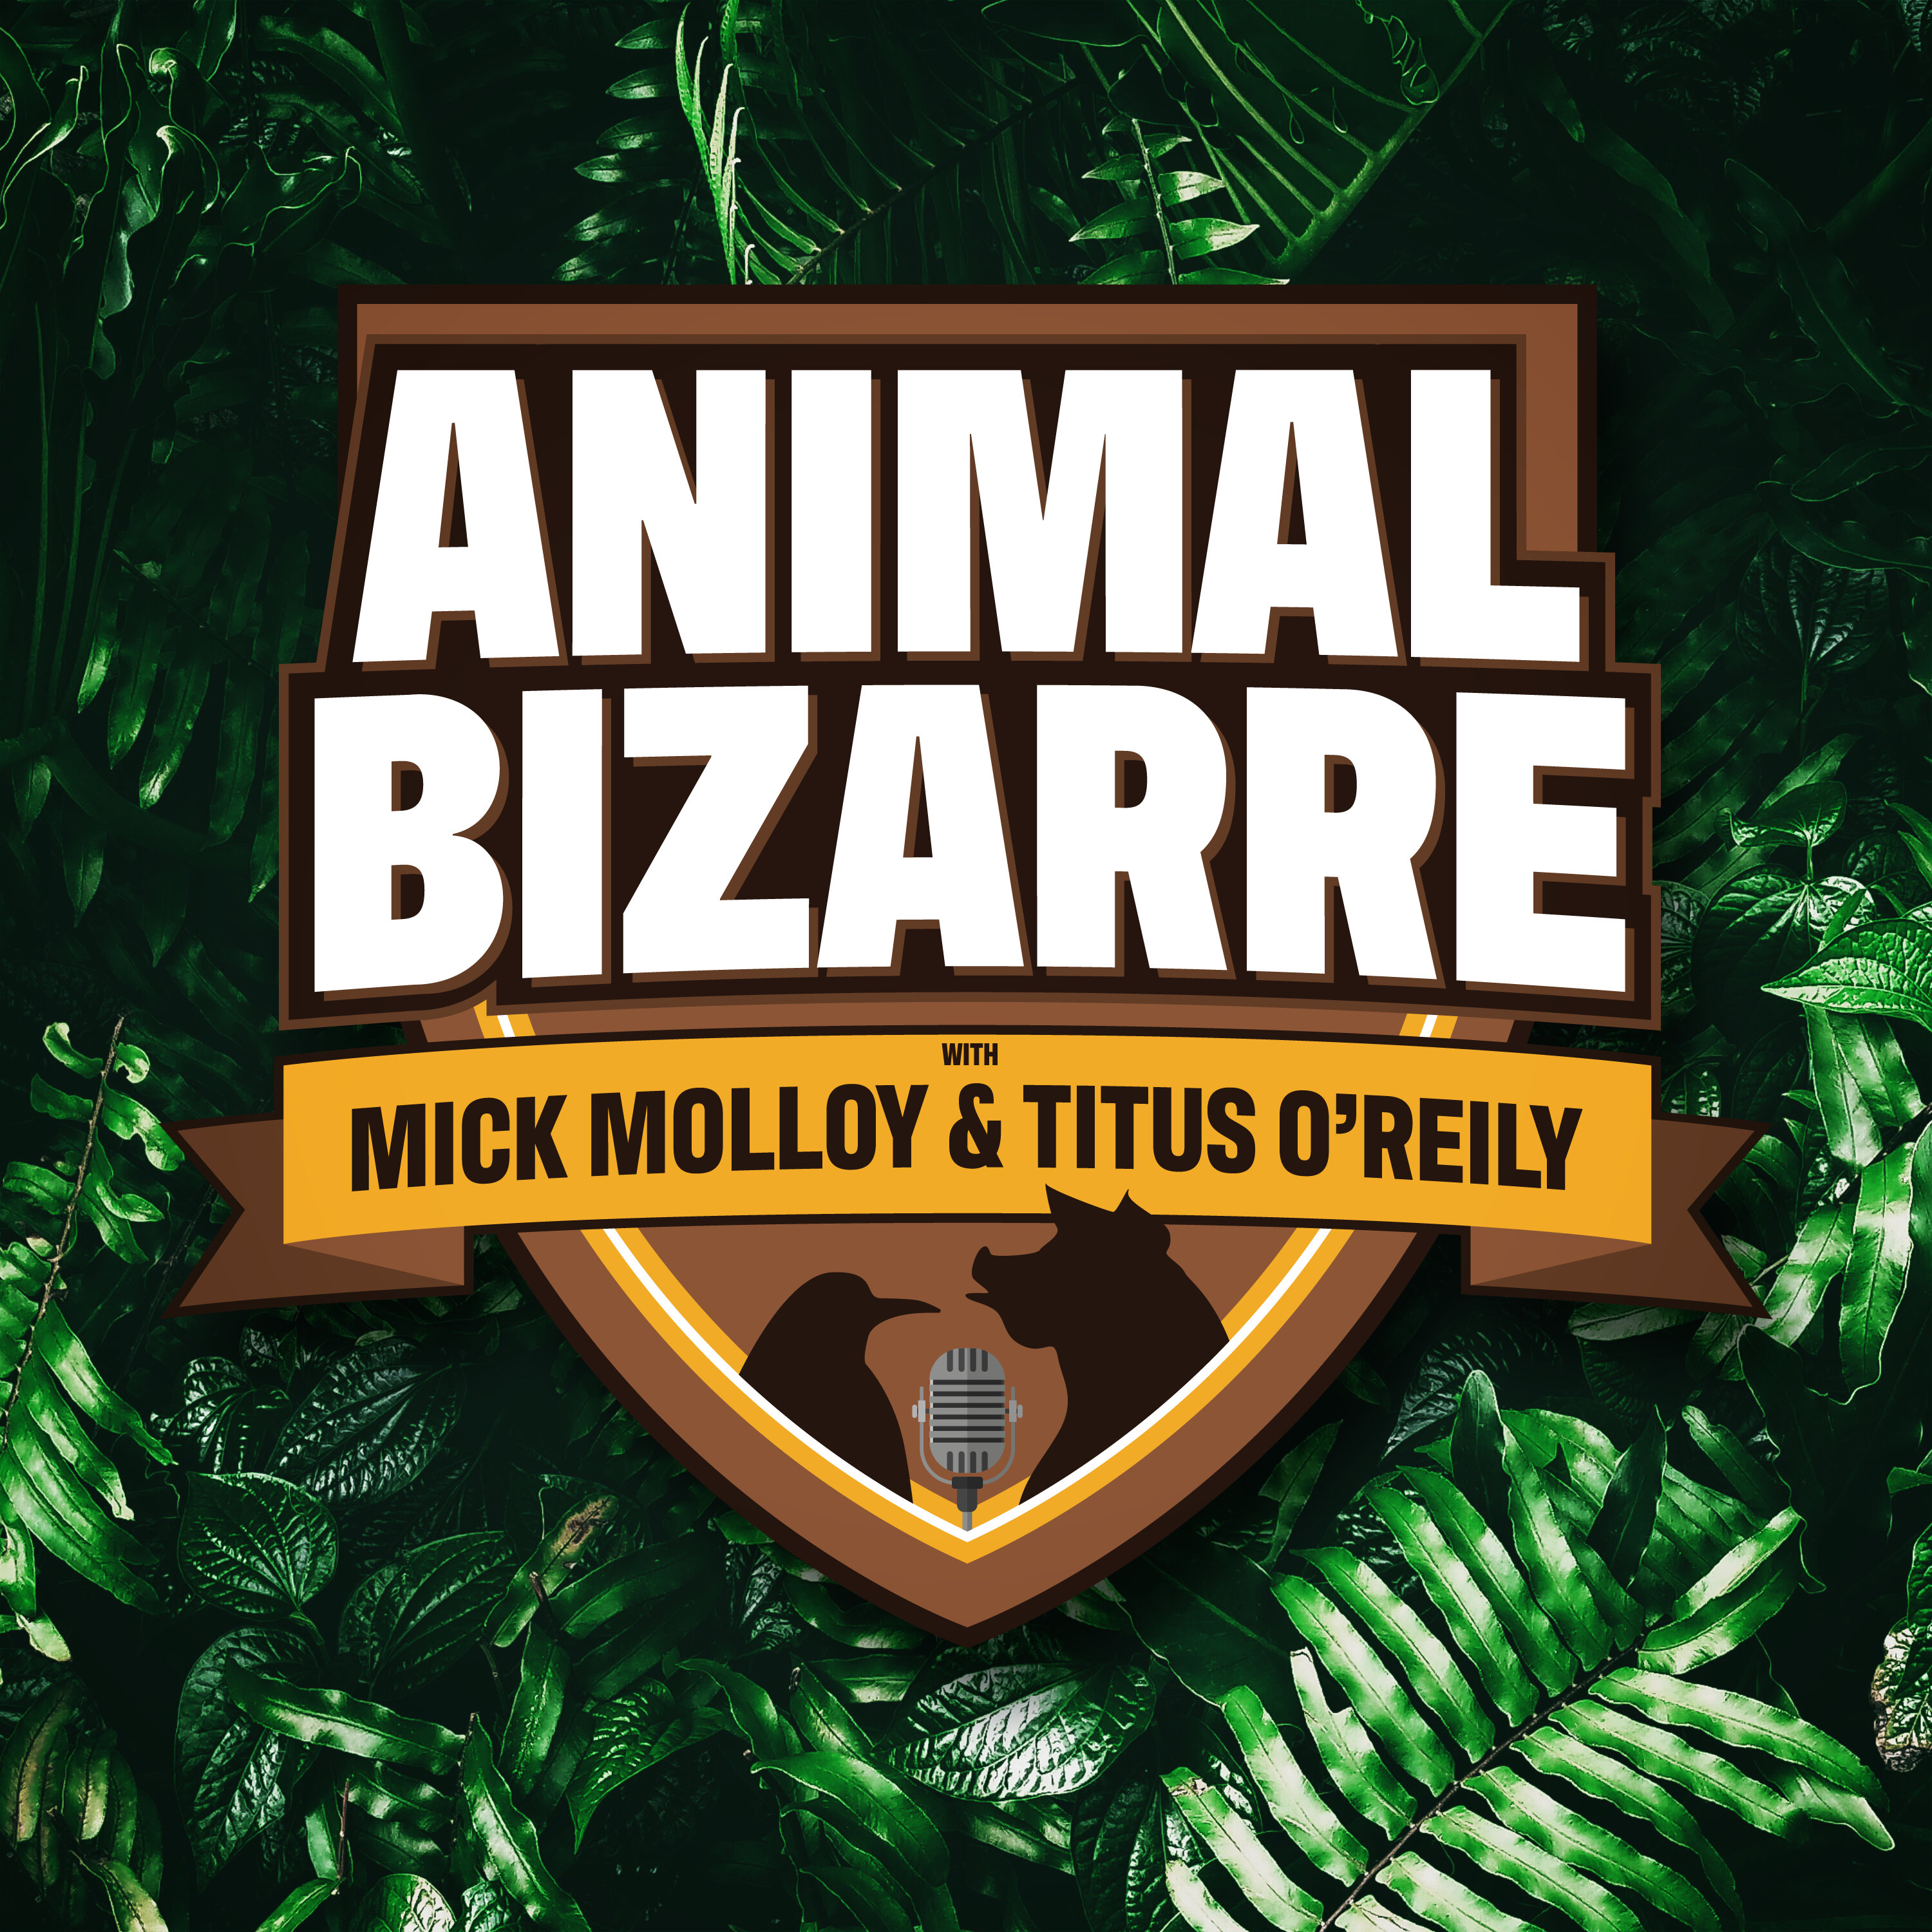 New Show Animal Bizarre Launches this Wednesday